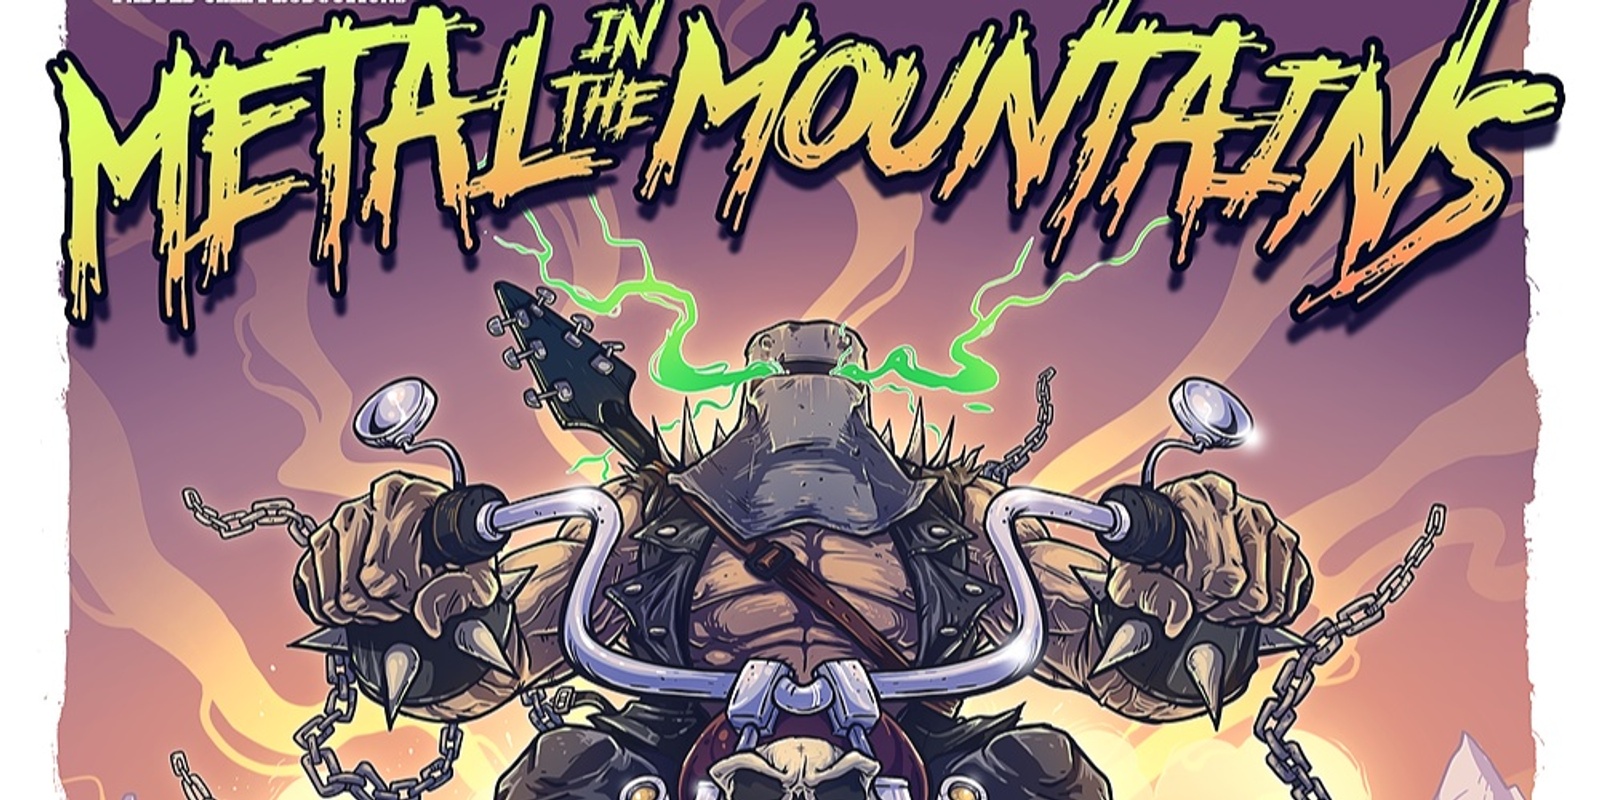 Banner image for Metal in the Mountains 2022